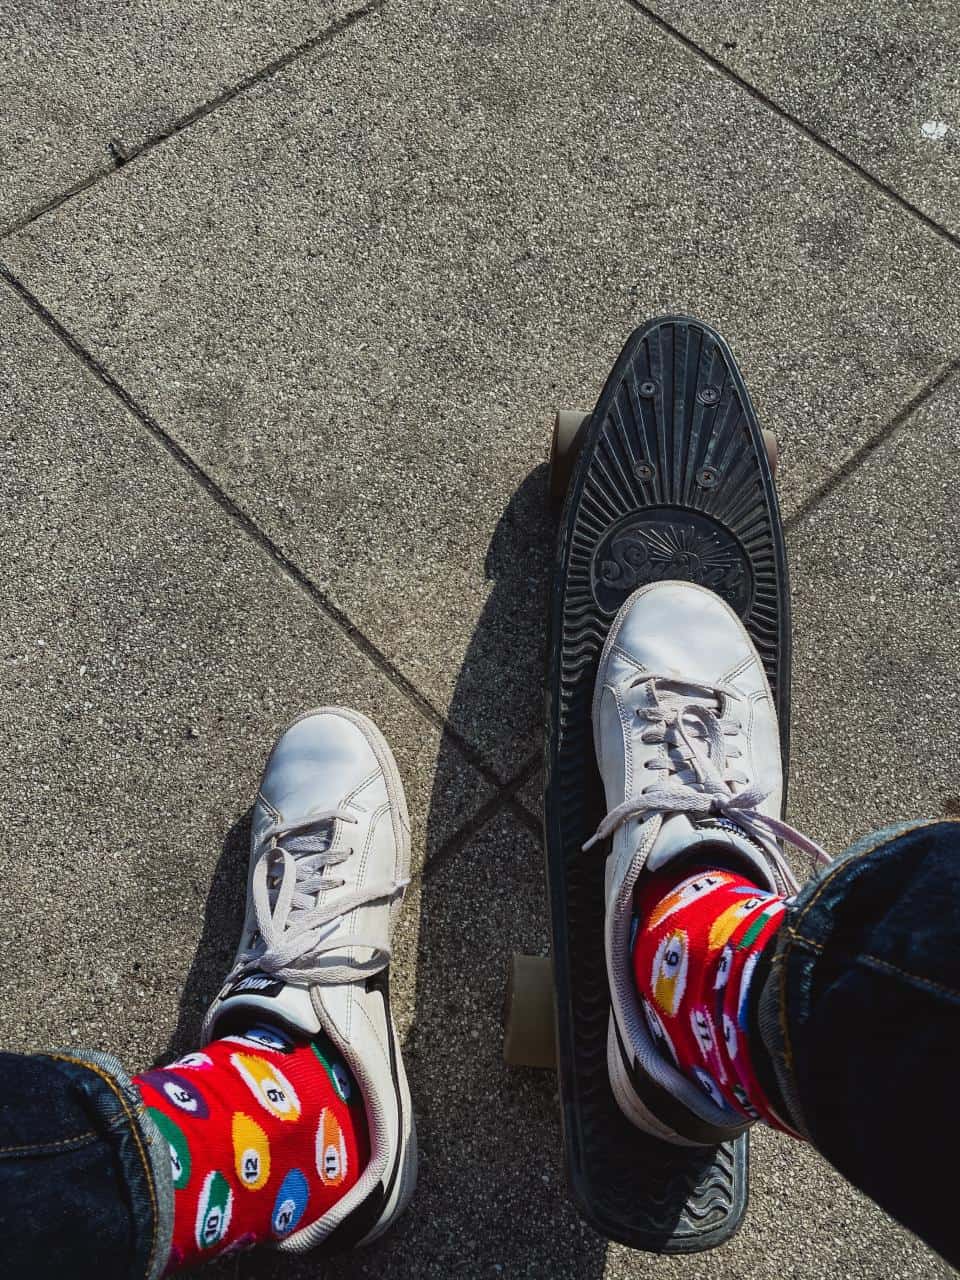 Printing on Socks, or a New Way to Be Different